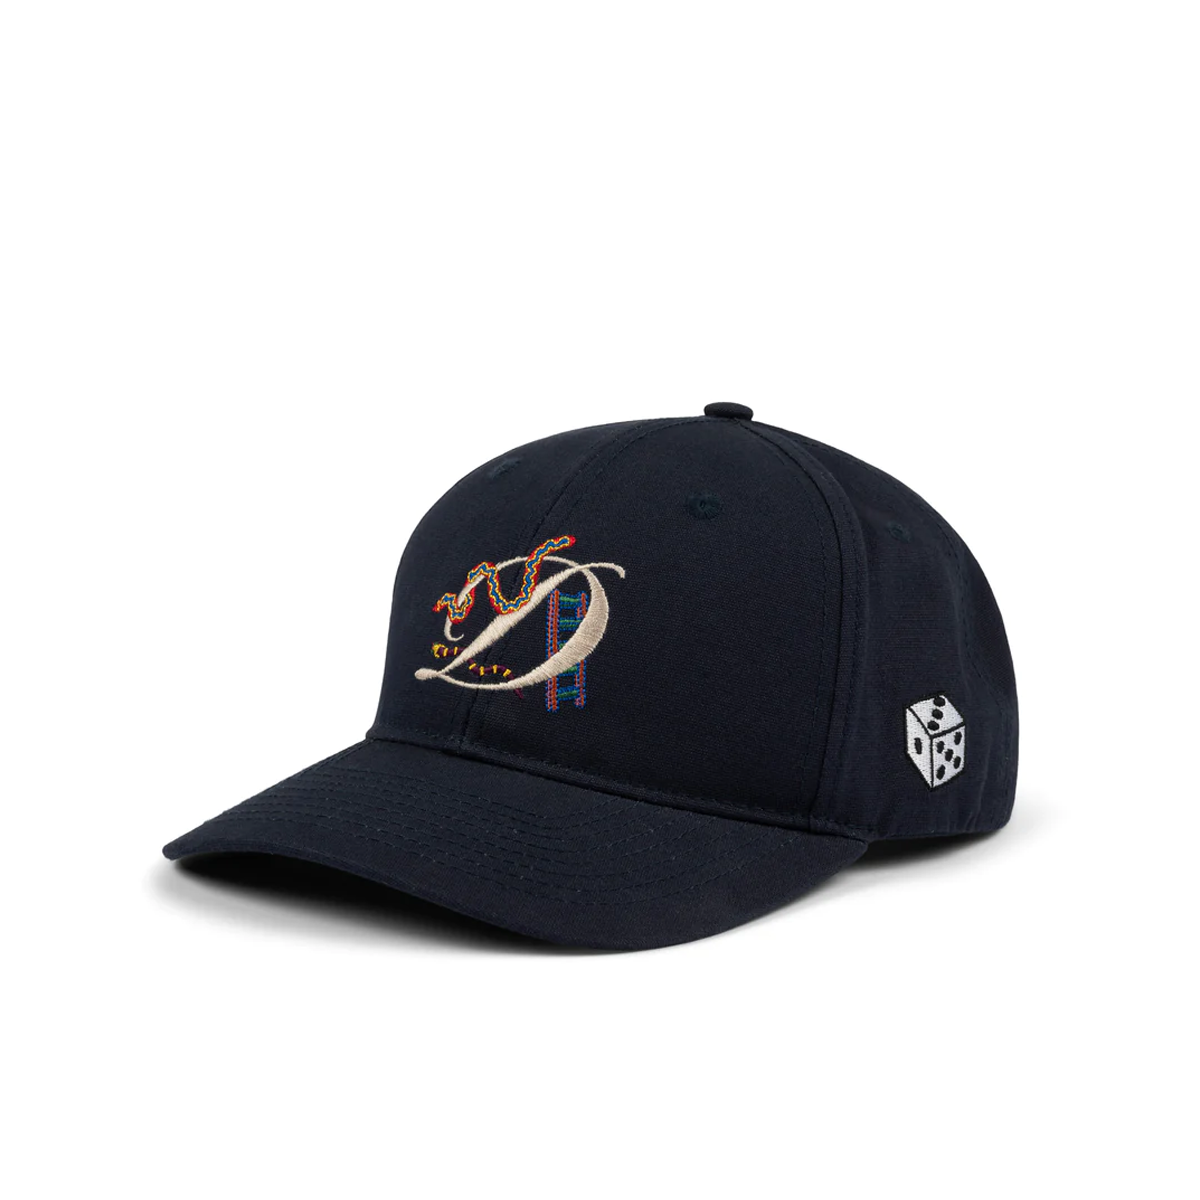 Dime D Snake Full Fit Hat - Assorted Colors